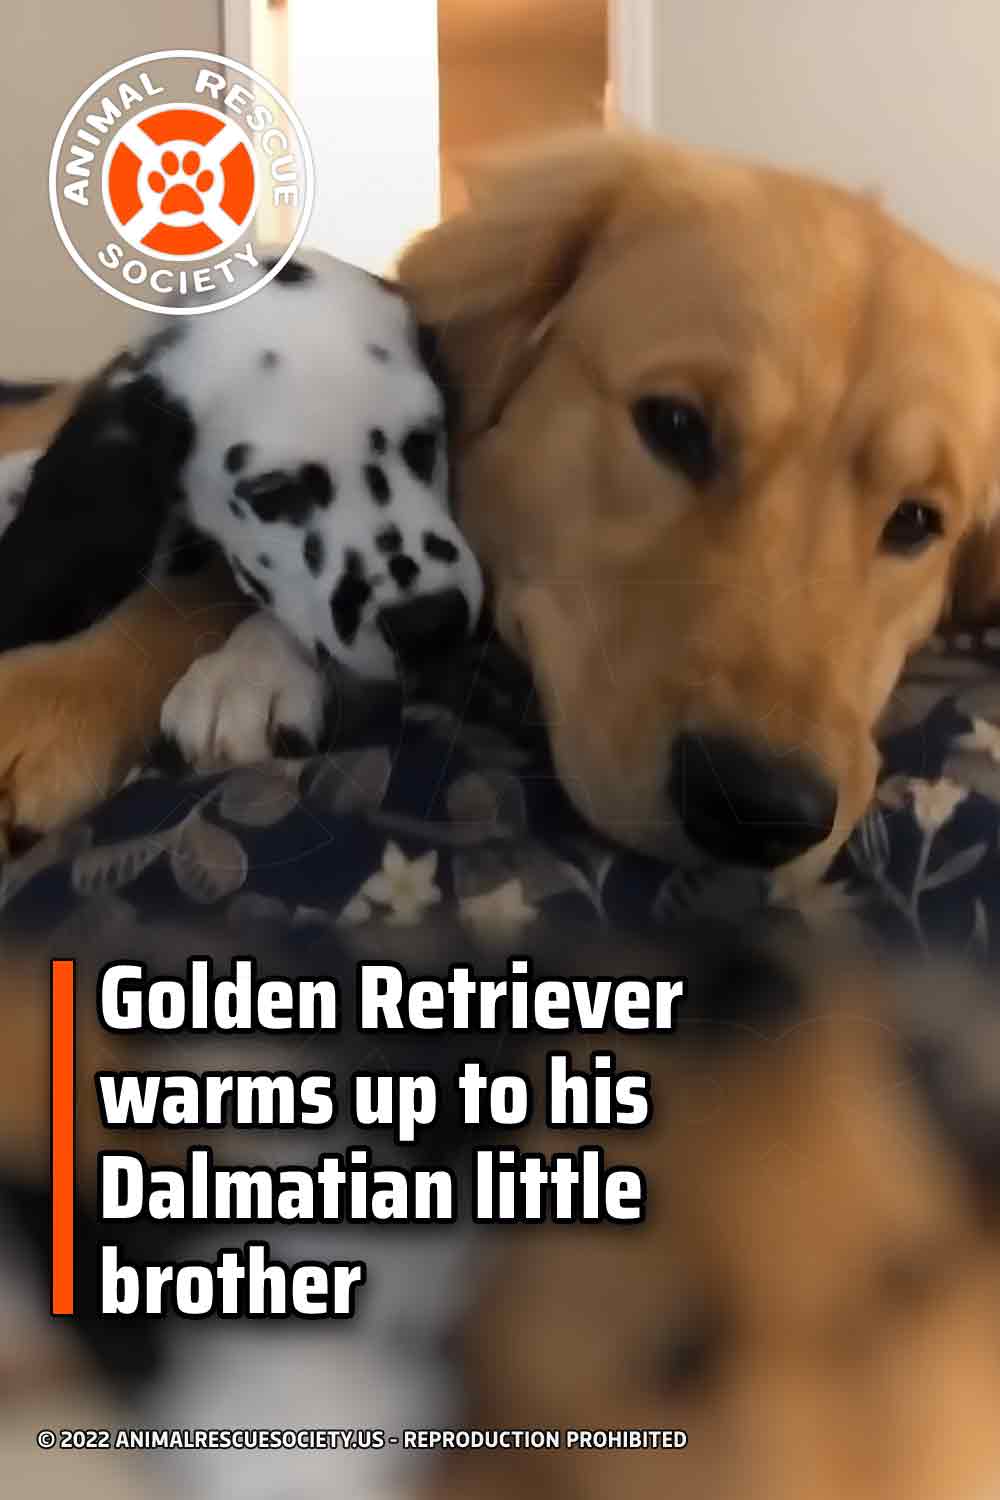 Golden Retriever warms up to his Dalmatian little brother